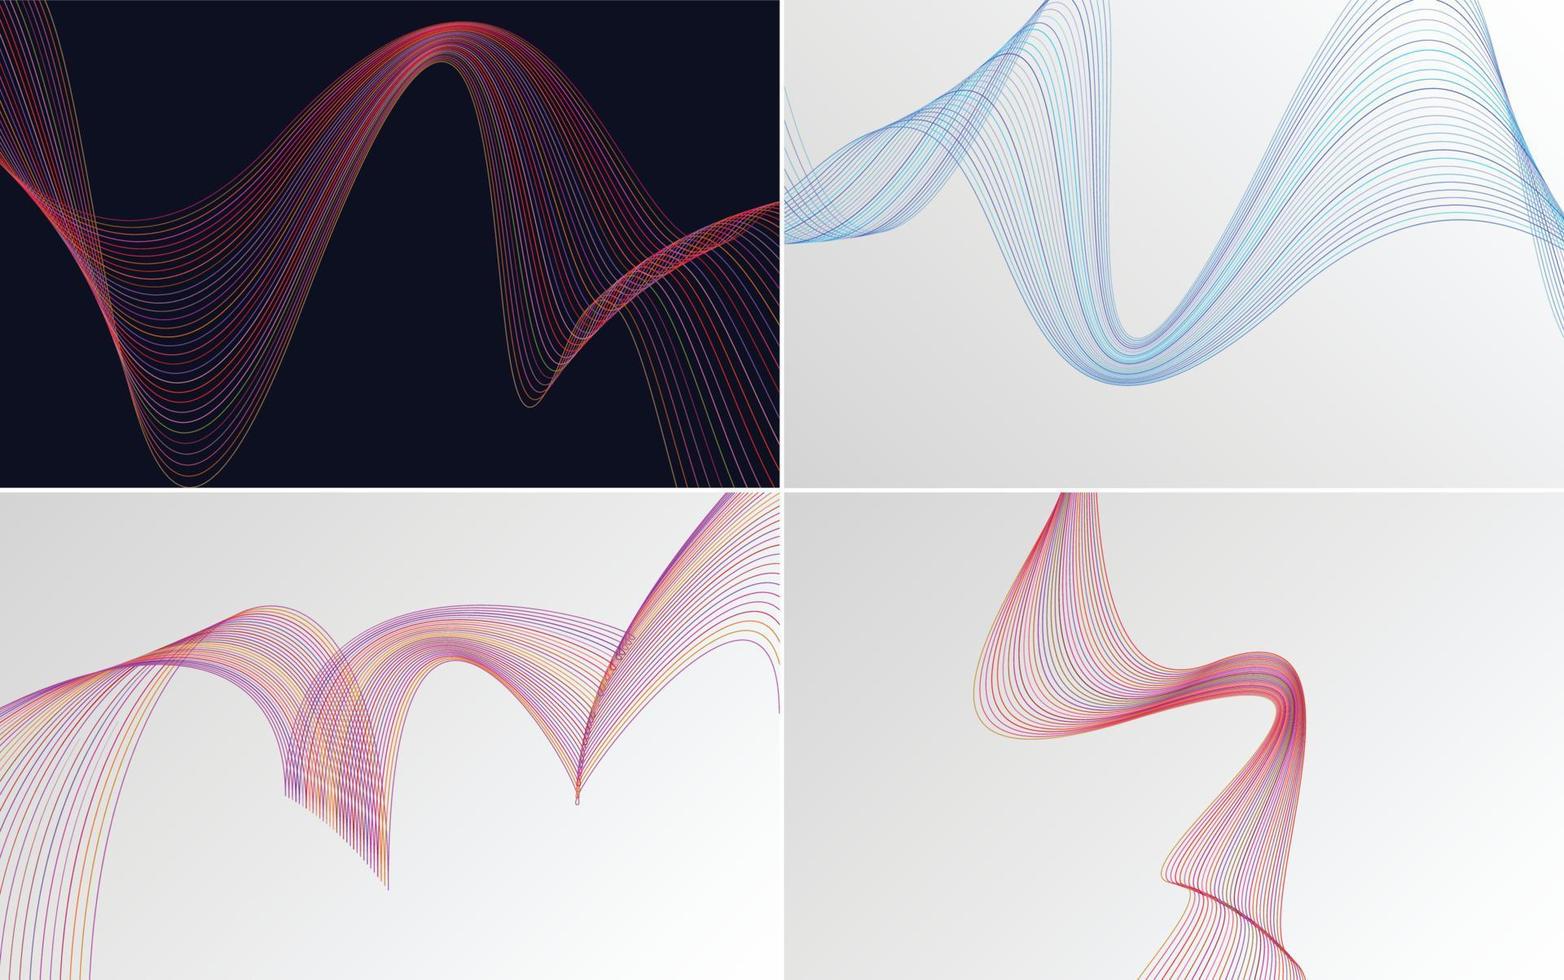 Set of 4 vector line backgrounds for a sleek and modern aesthetic